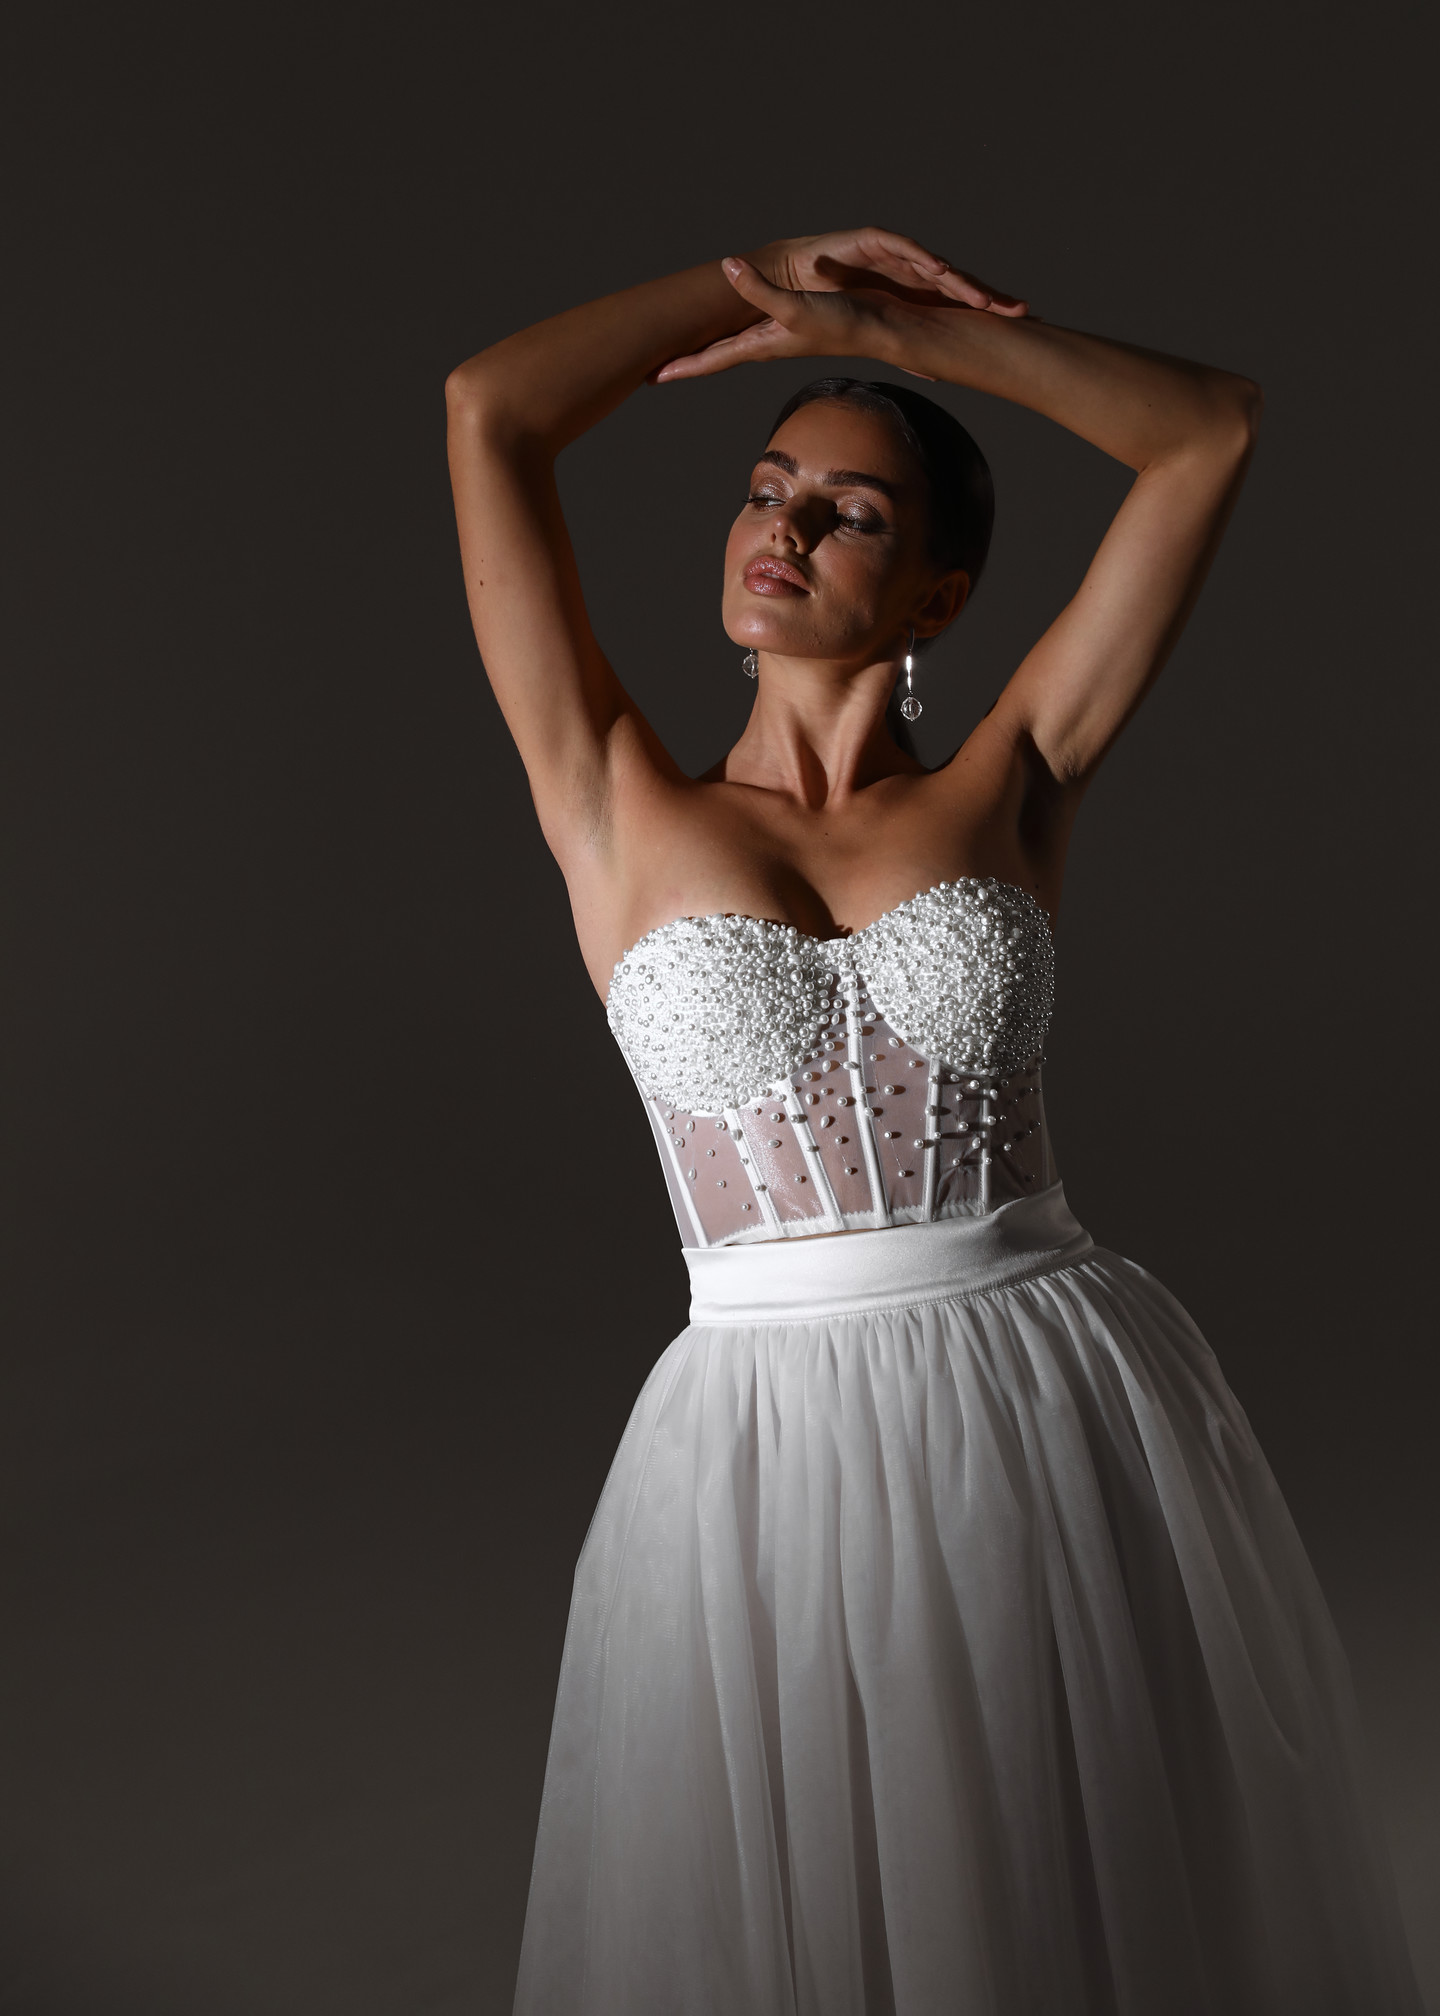 Beaded bustier, 2021, couture, top, bridal, off-white, bridal corset and skirt #2, embroidery, corset, popular